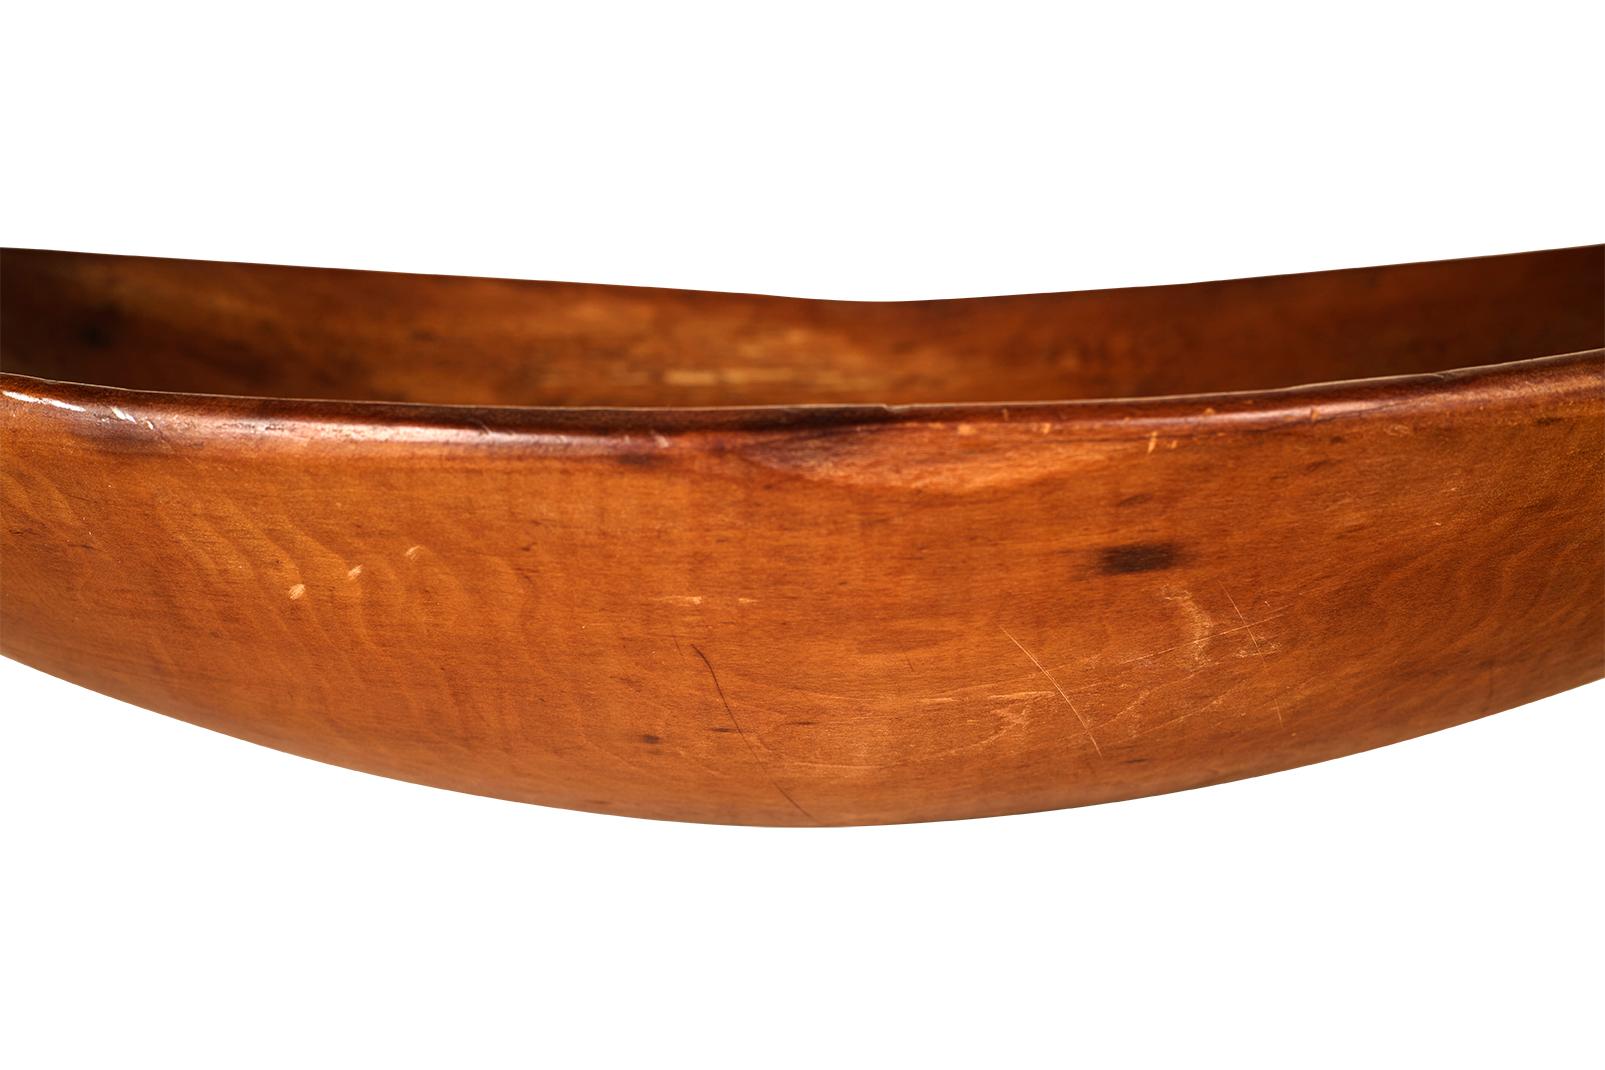 Early Oval Hand Carved Wood Bowl In Good Condition For Sale In Dallas, TX